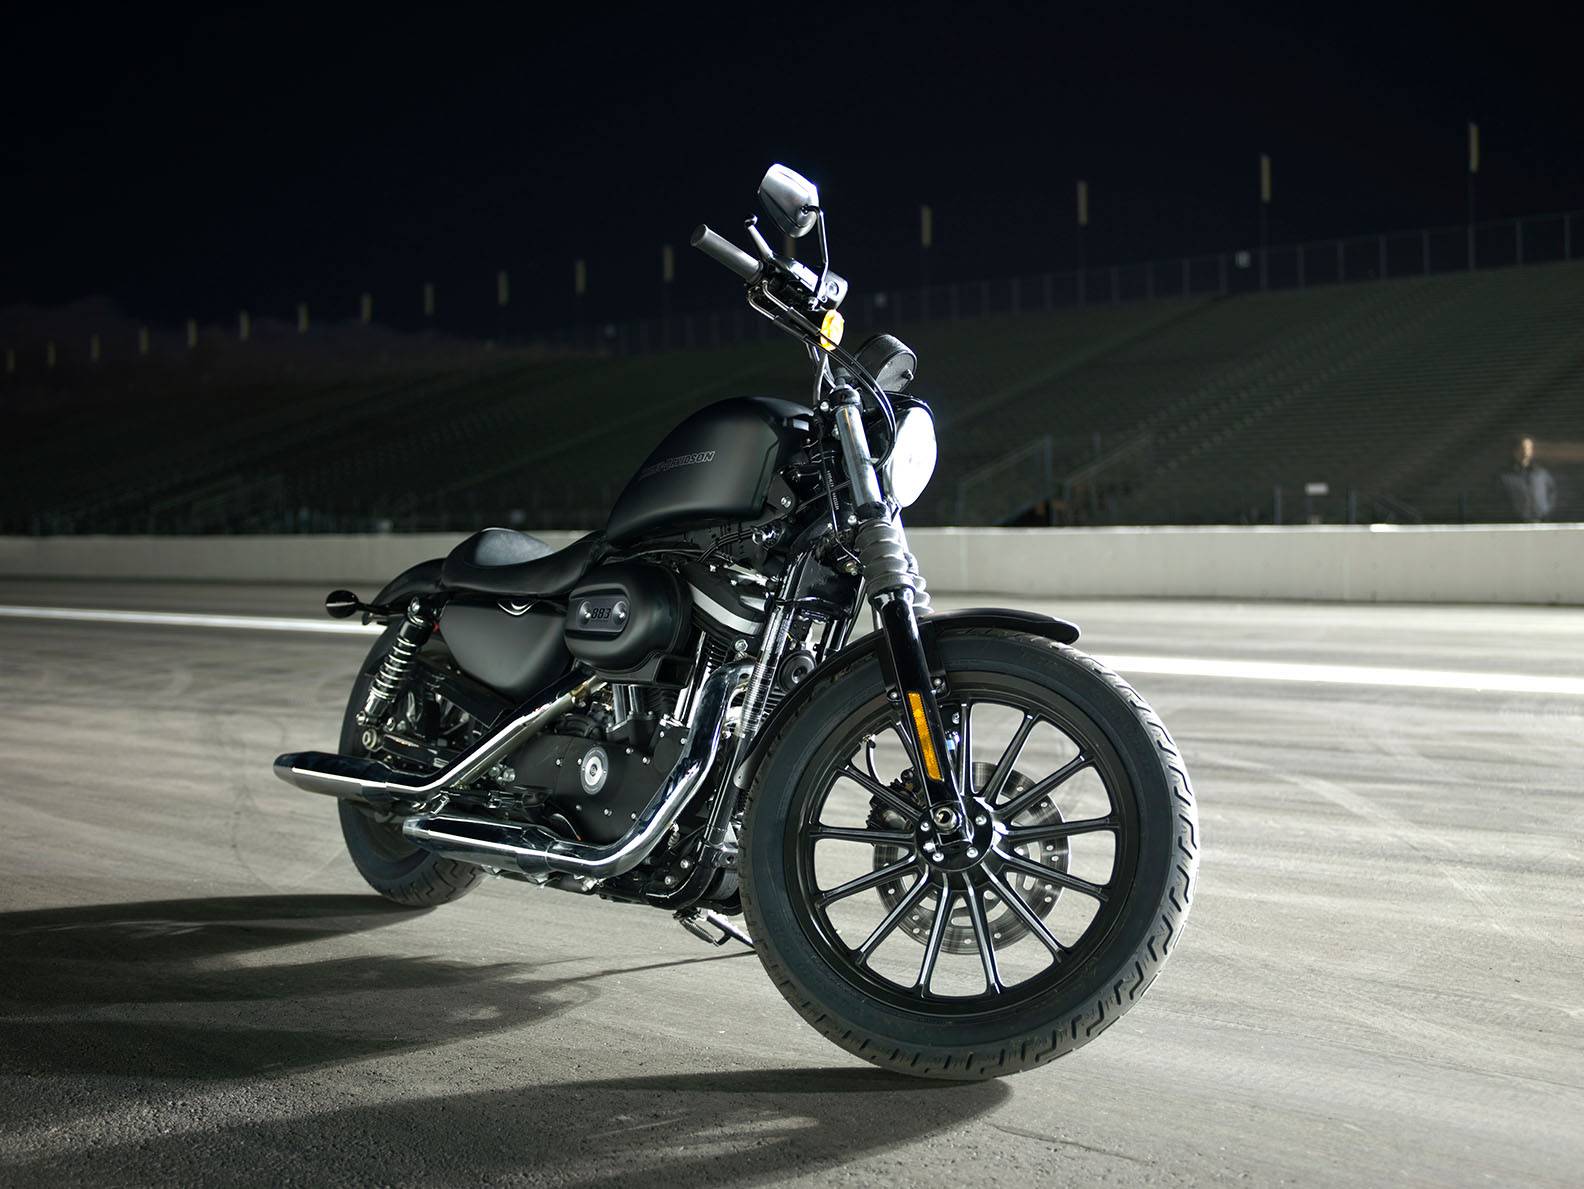 Harley Davidson Iron 883 10 Photo, Image, Picture and wallpaper ...